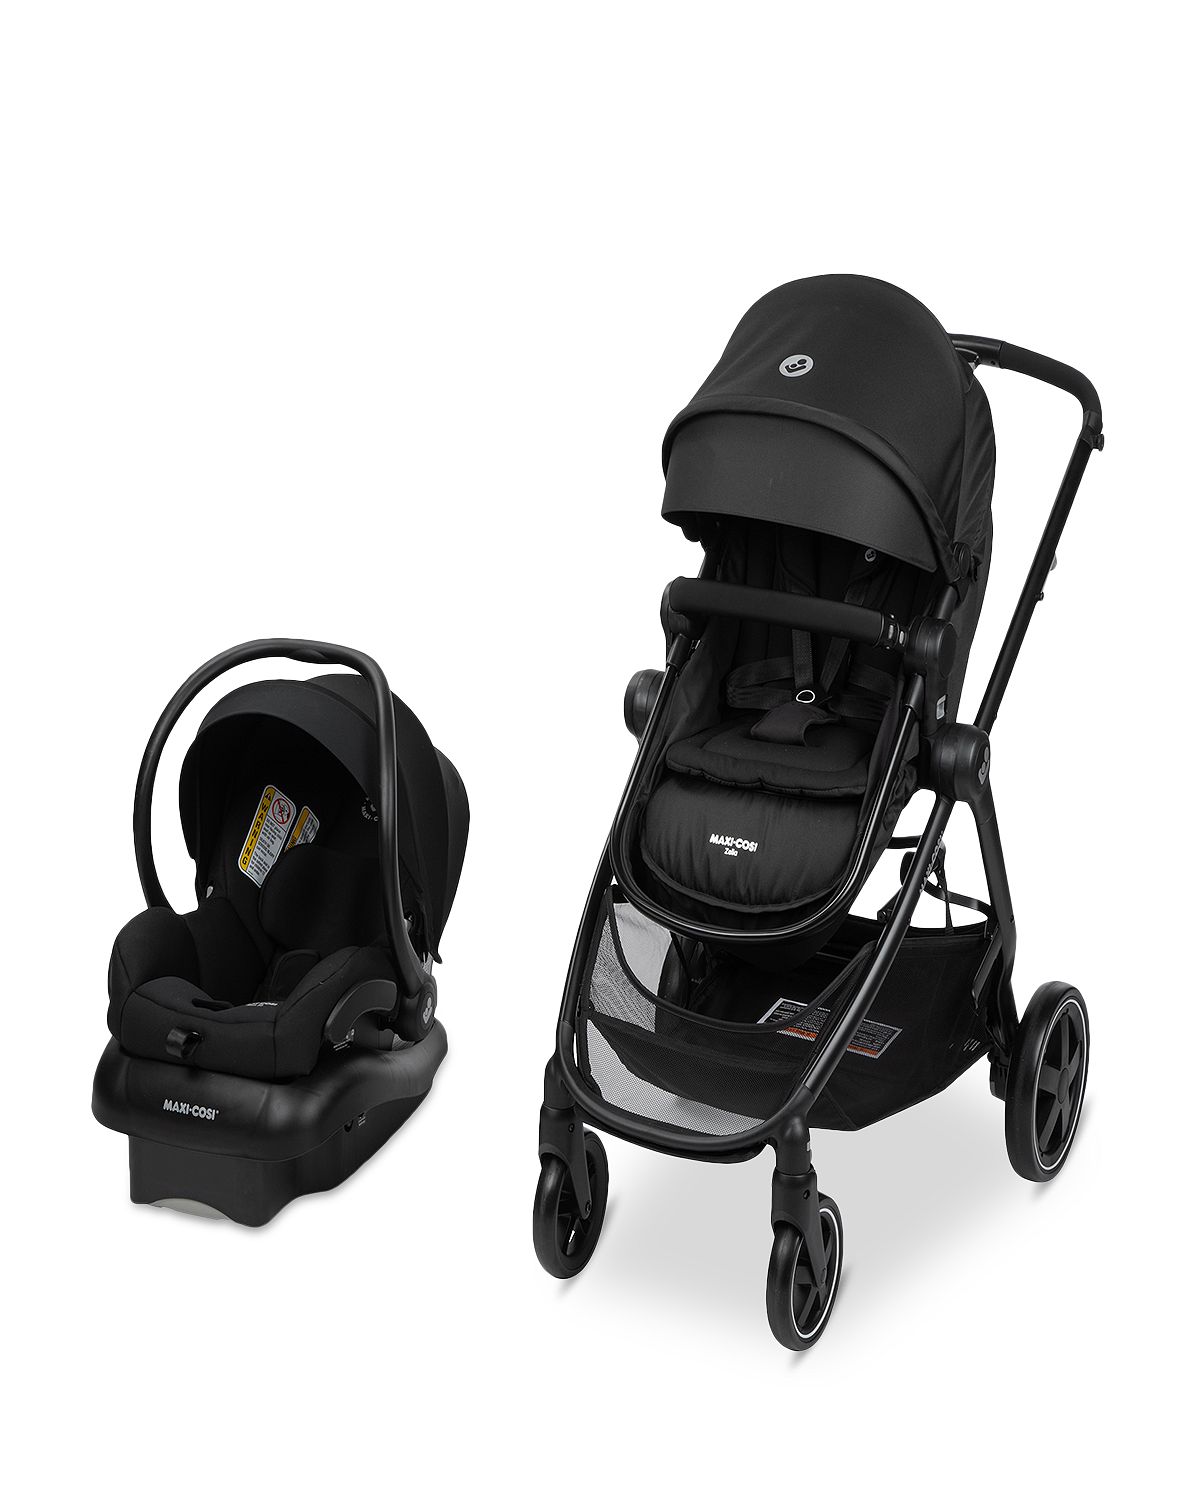 Photo 1 of Zelia² 5-in-1 Modular Travel System With Mico 30 Infant Car Seat